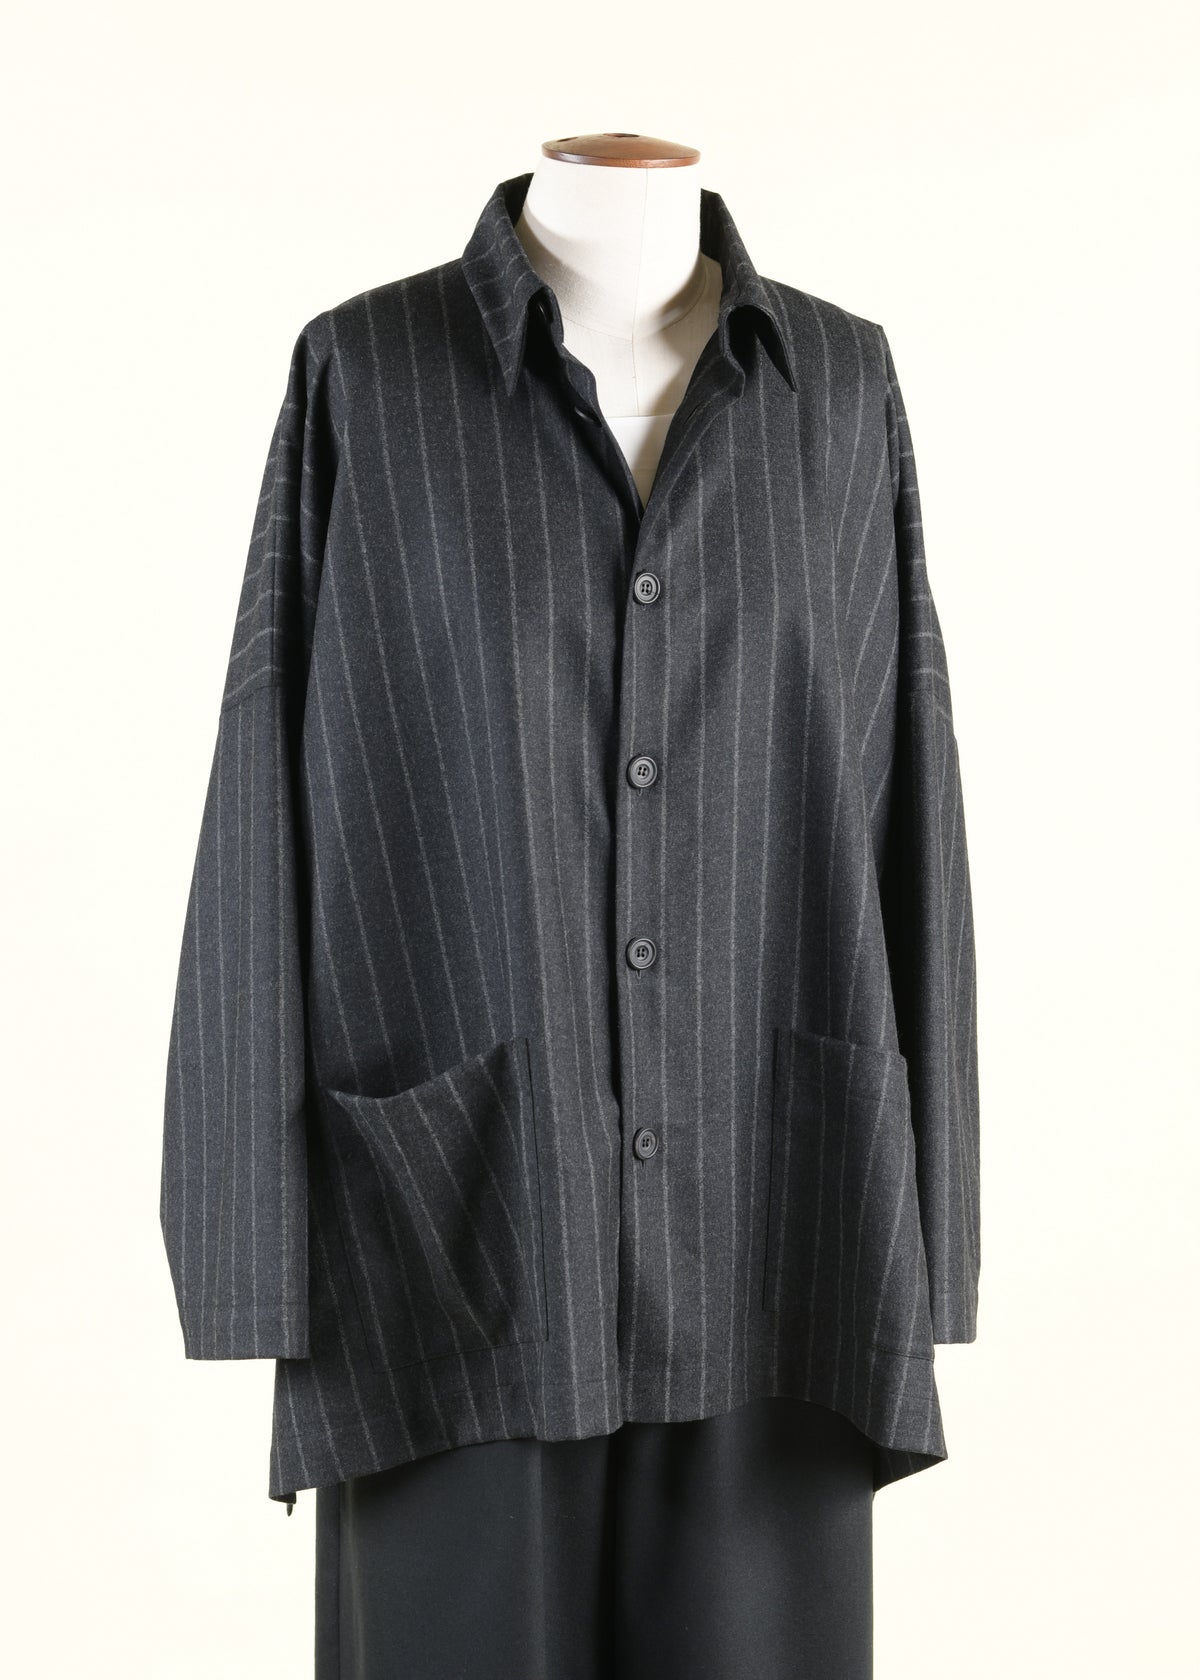 wide longer back jacket with collar - long